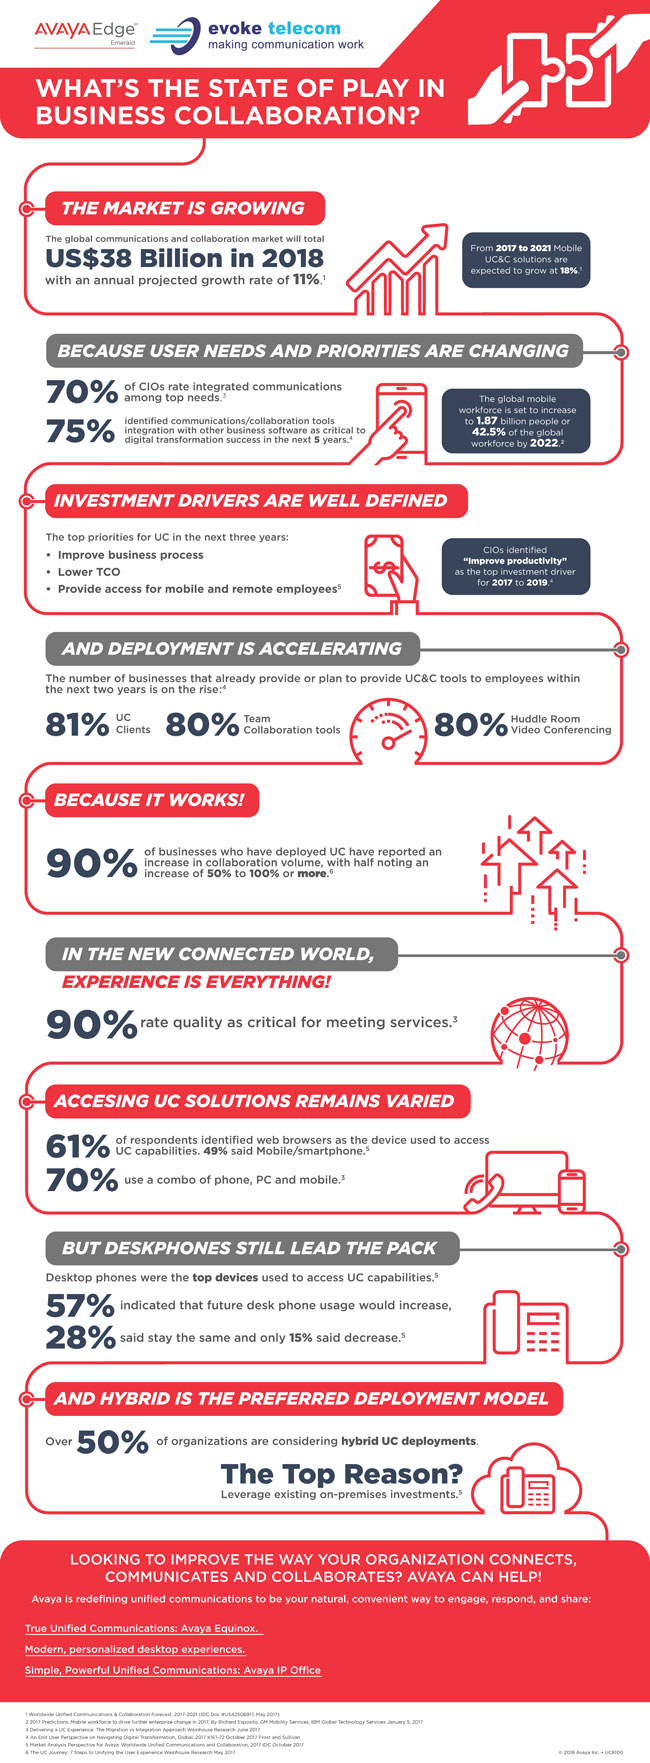 Unified communications infographic